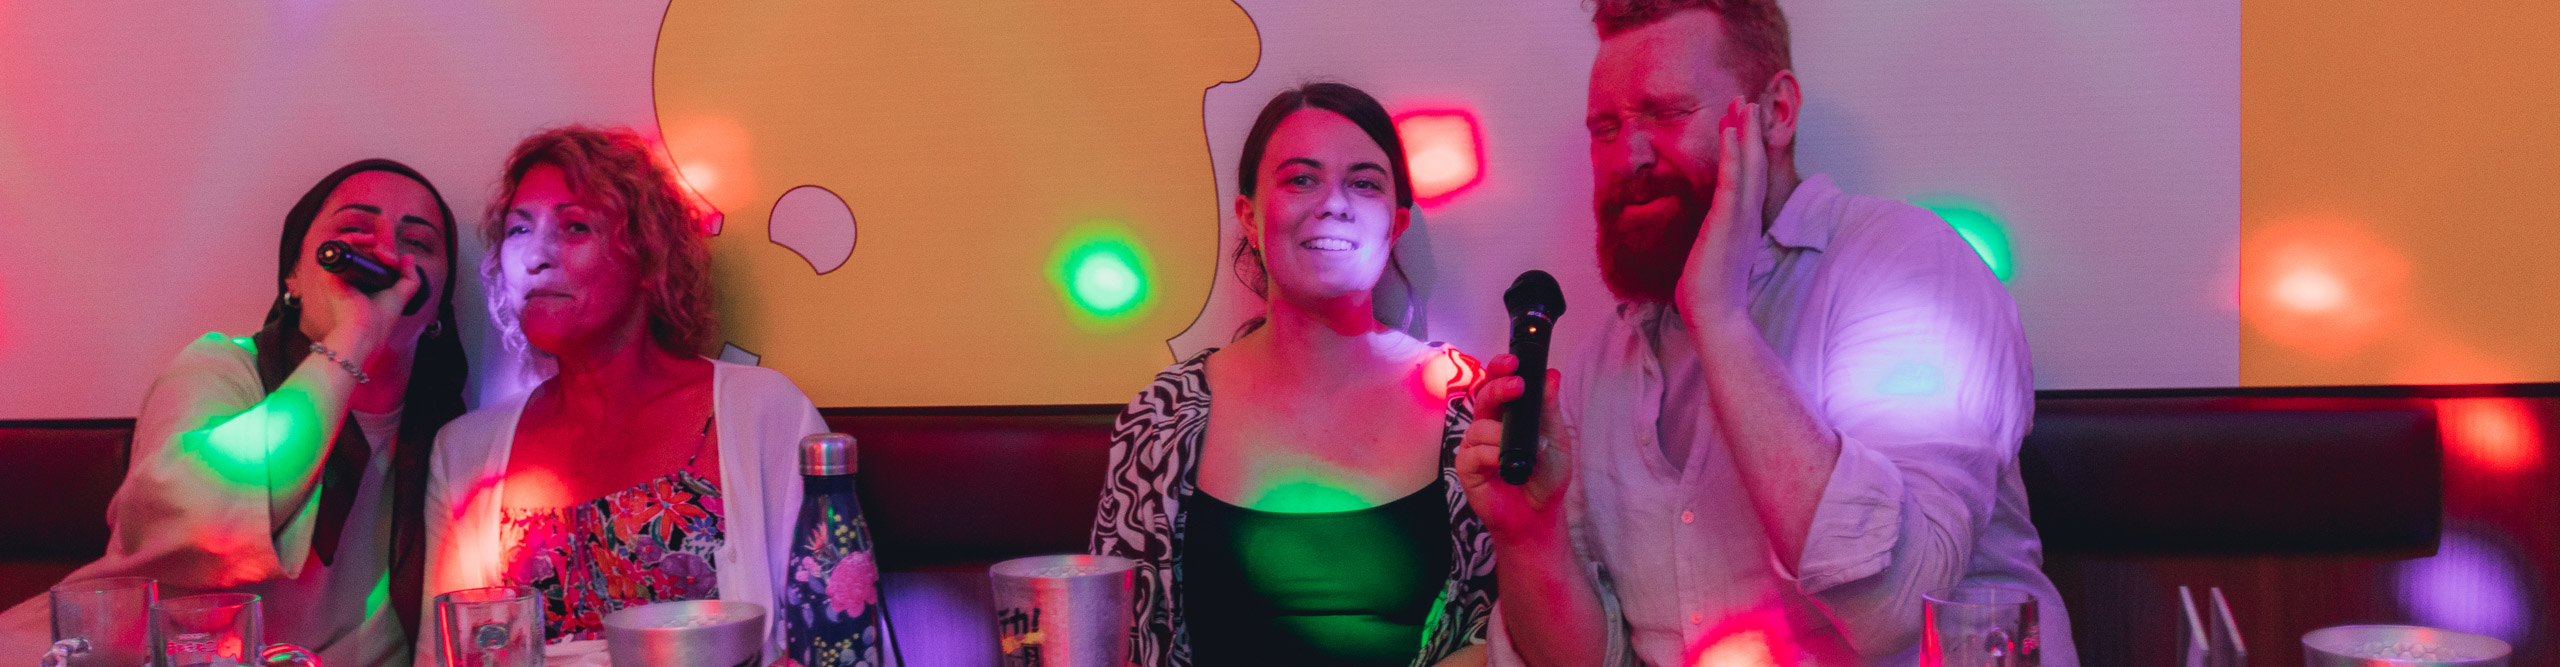 Group singing in a karaoke booth with brights coloured lights on the wall, Osaka, Japan